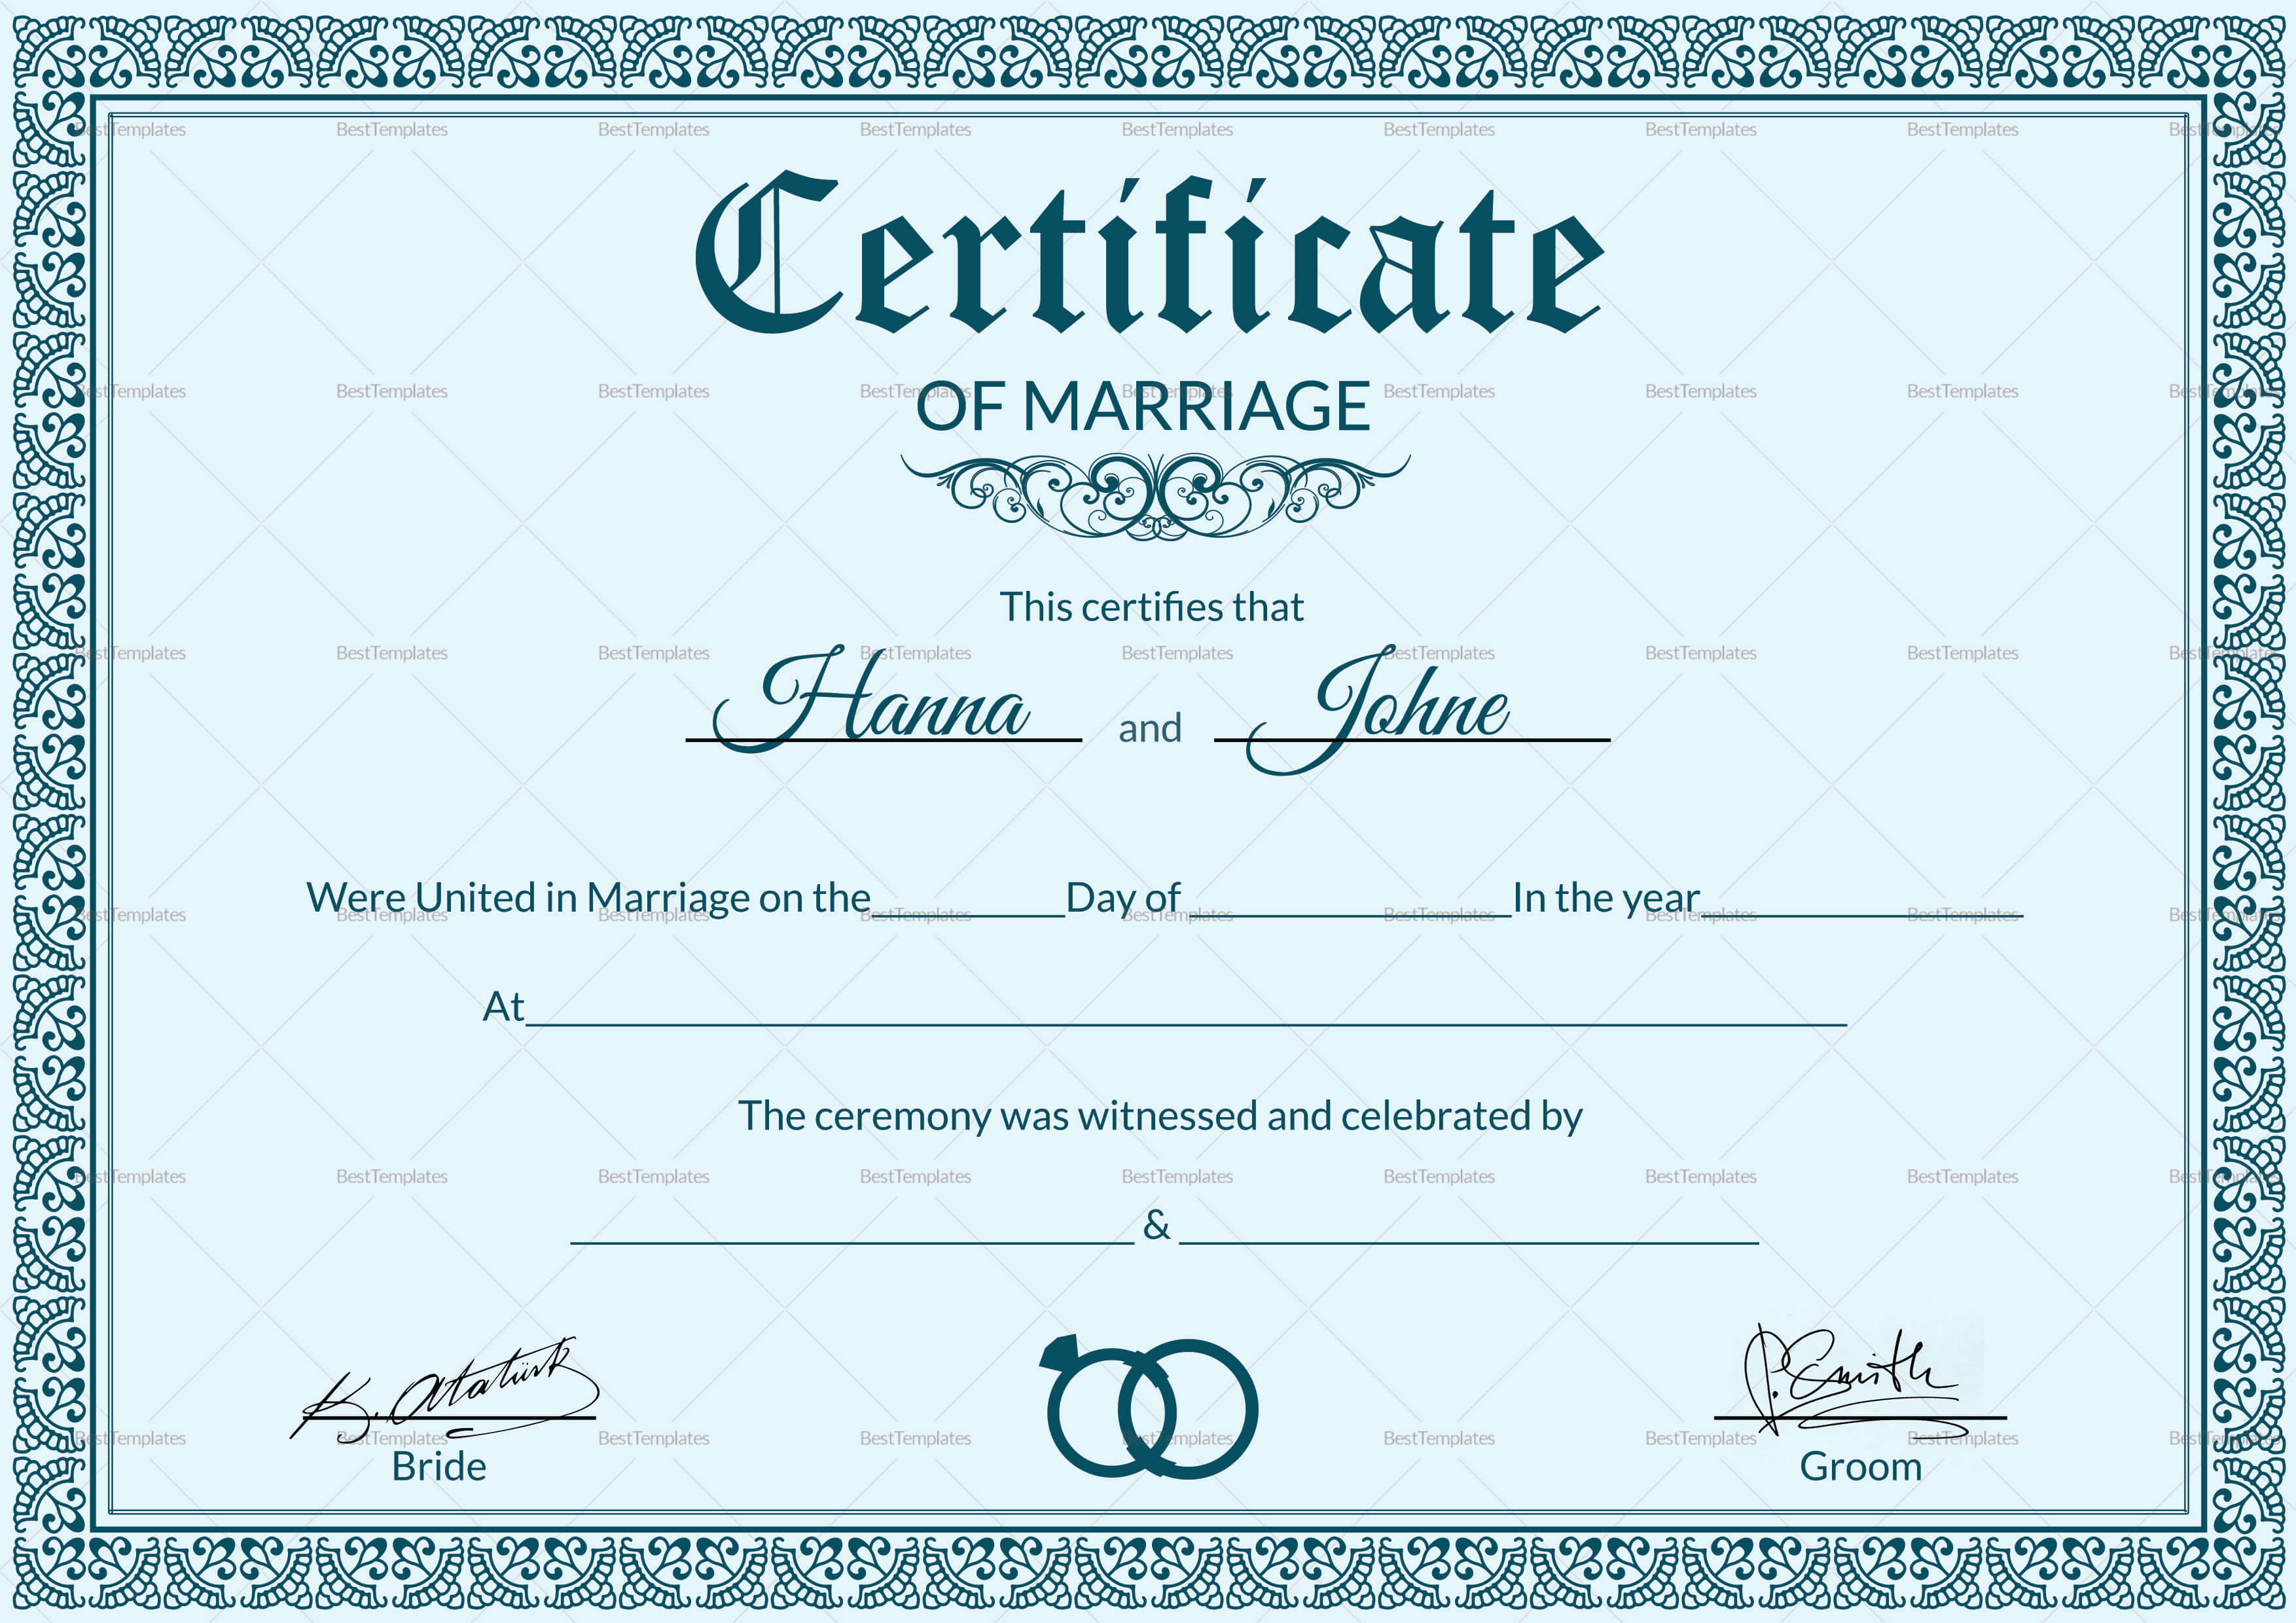 Certificate Templates: Free Editable Marriage Certificate With Regard To Star Performer Certificate Templates